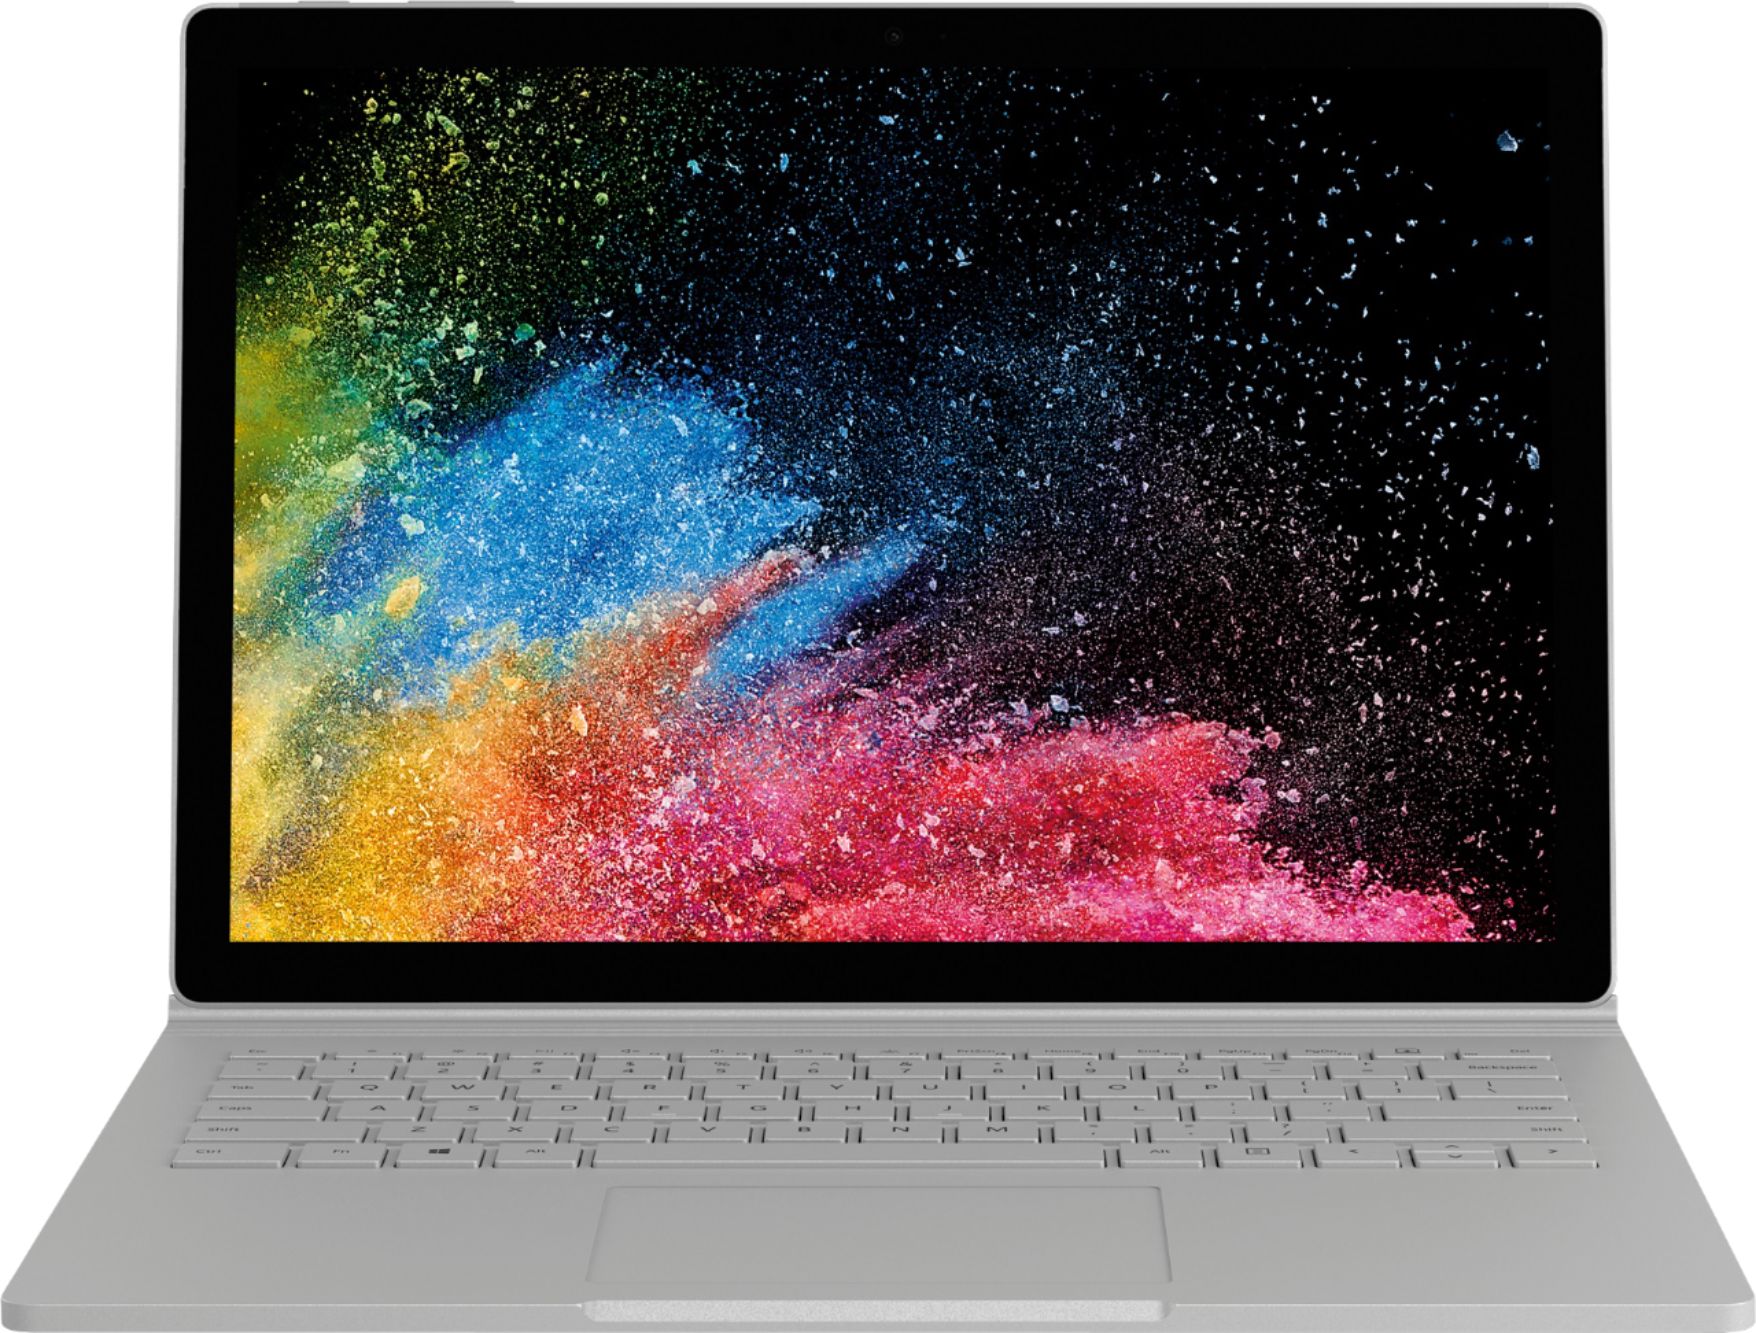 Angle View: Microsoft - Surface Book 2 - 13.5" Touch-Screen PixelSense™ - 2-in-1 Laptop - Intel Core i7 - 8GB Memory - 256GB SSD - Platinum